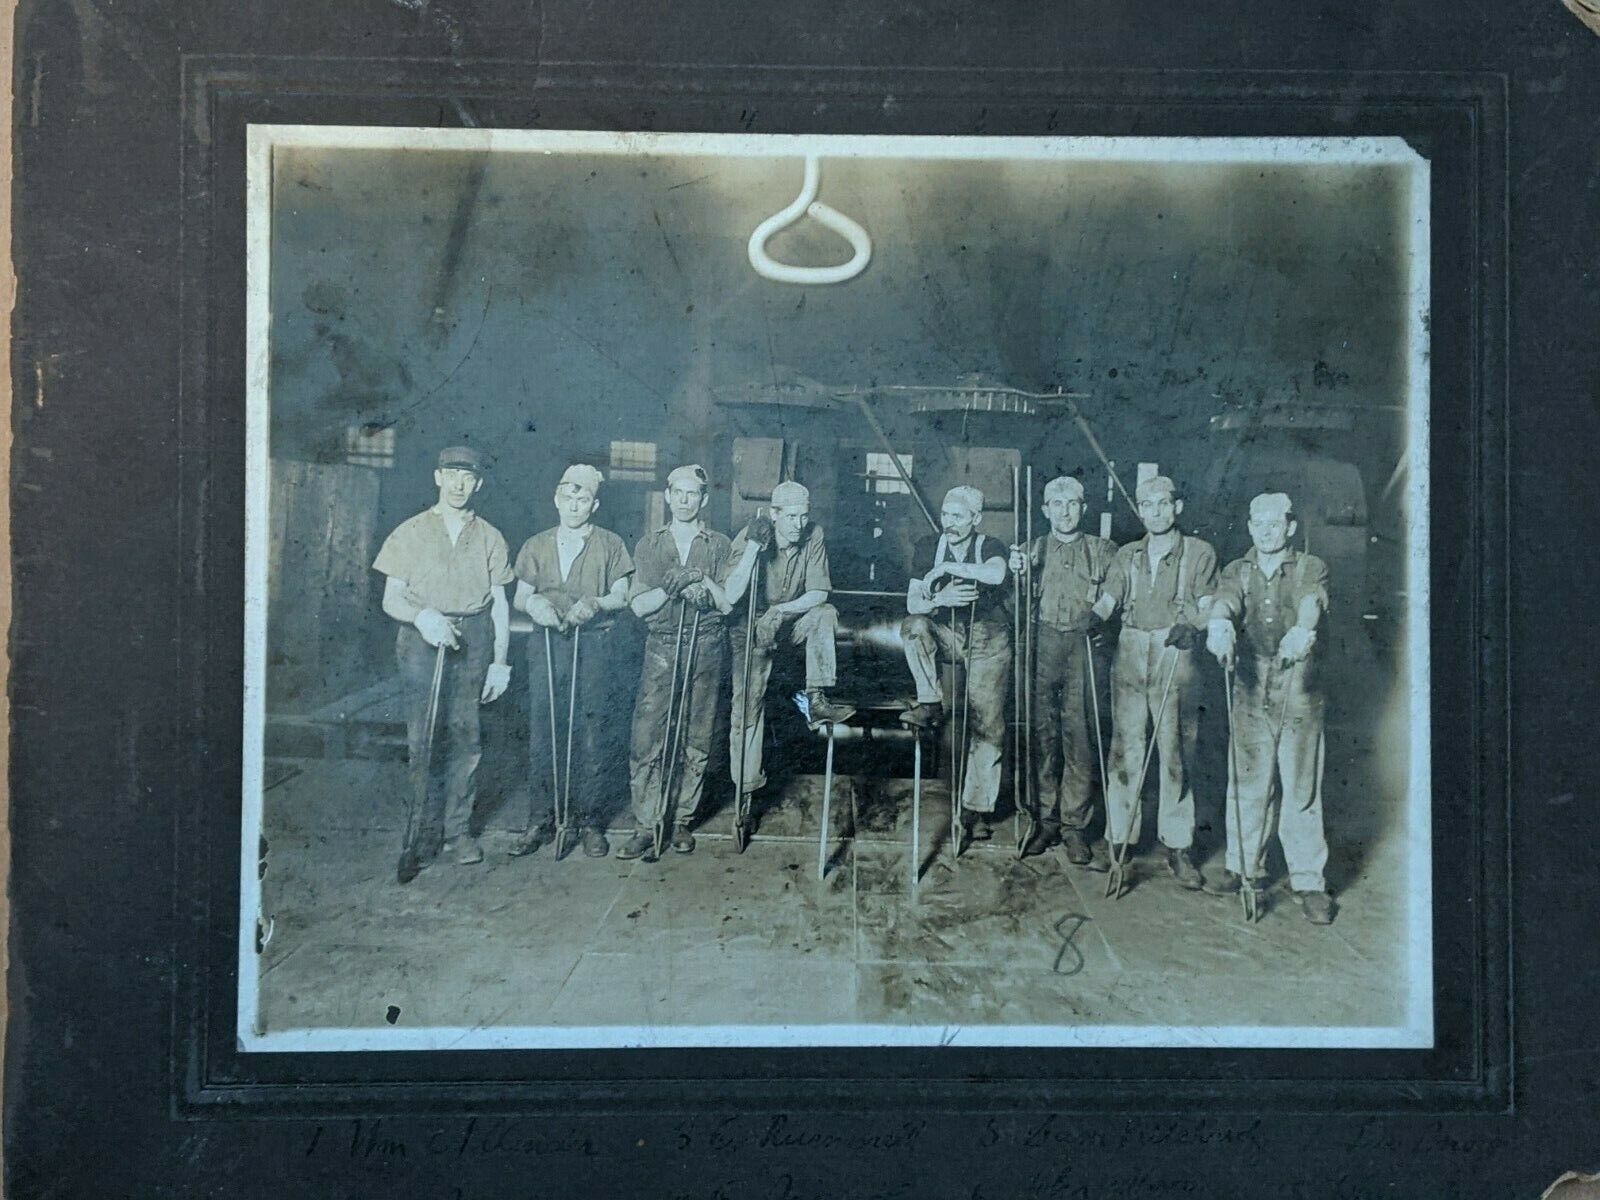 Old Photo of Steel Workers / Foundry